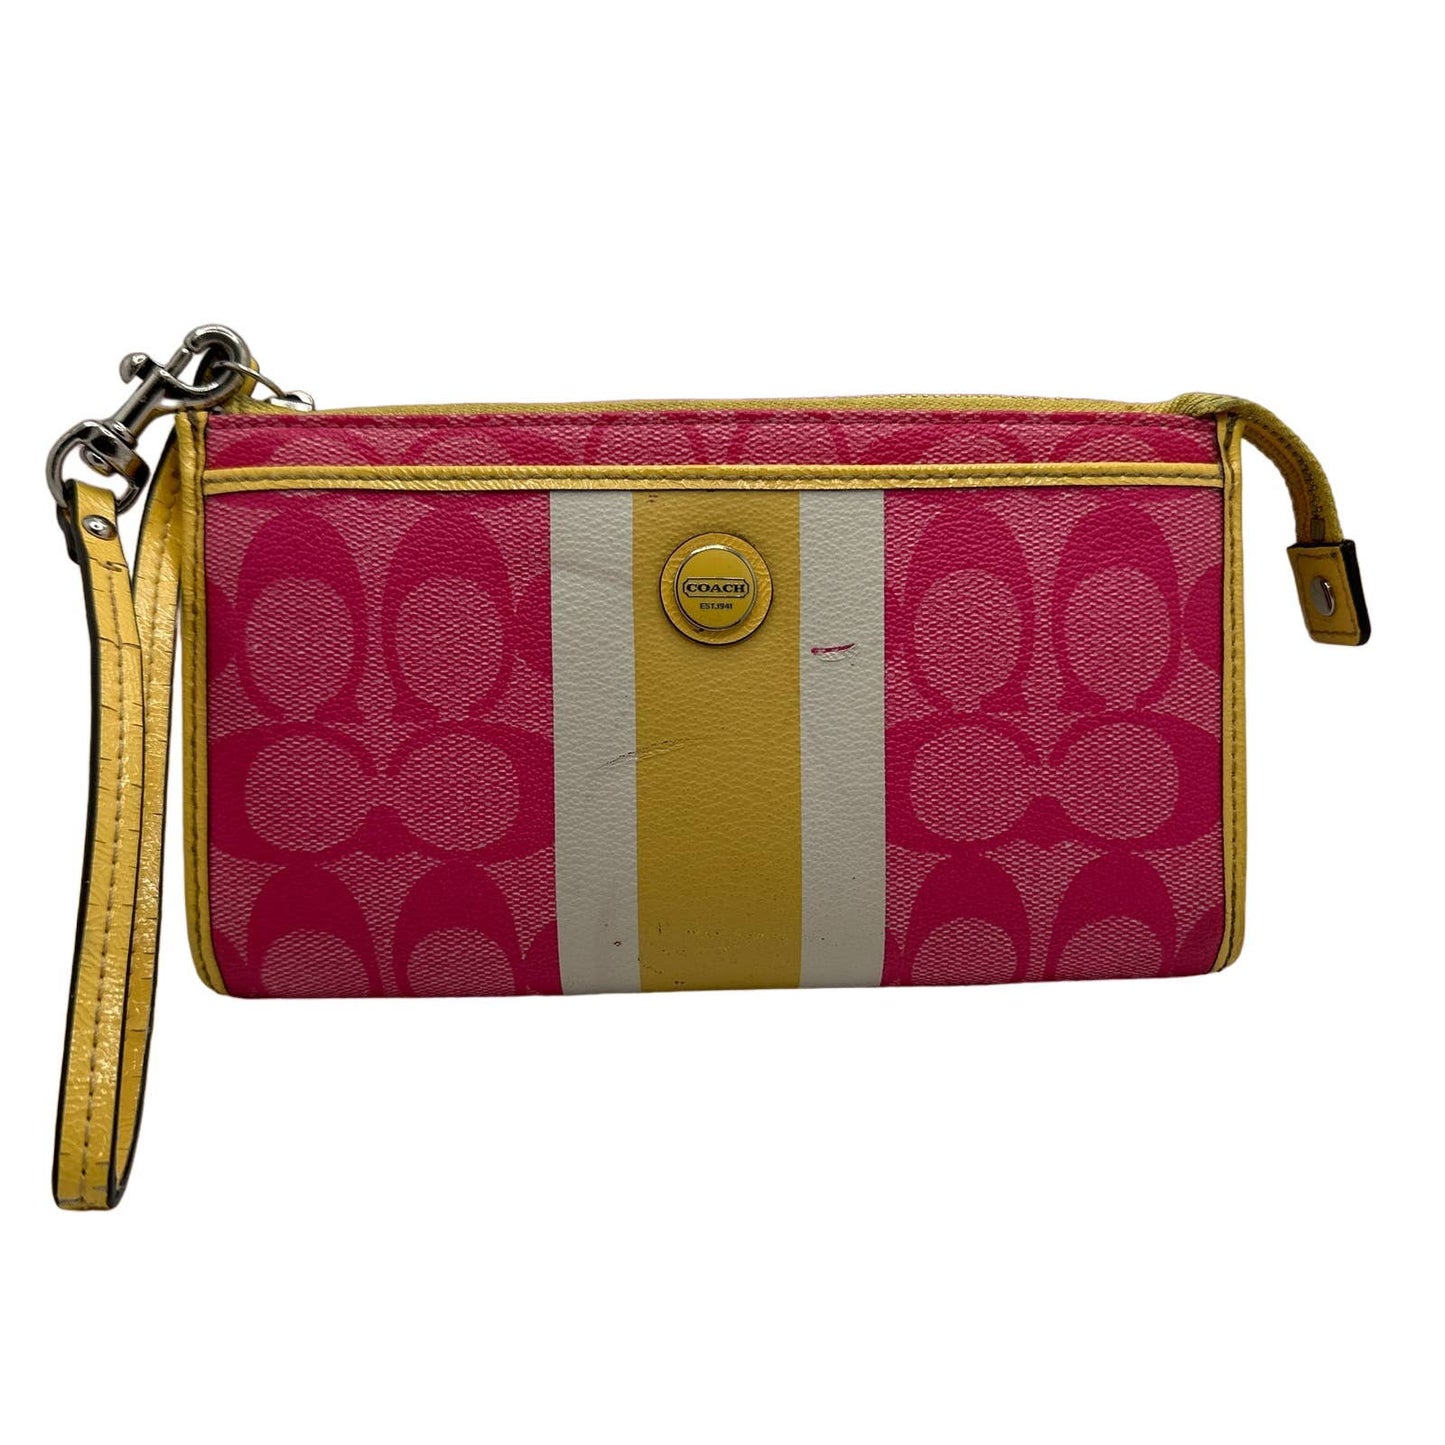 COACH Pink and Yellow Signature Coated Canvas Wristlet